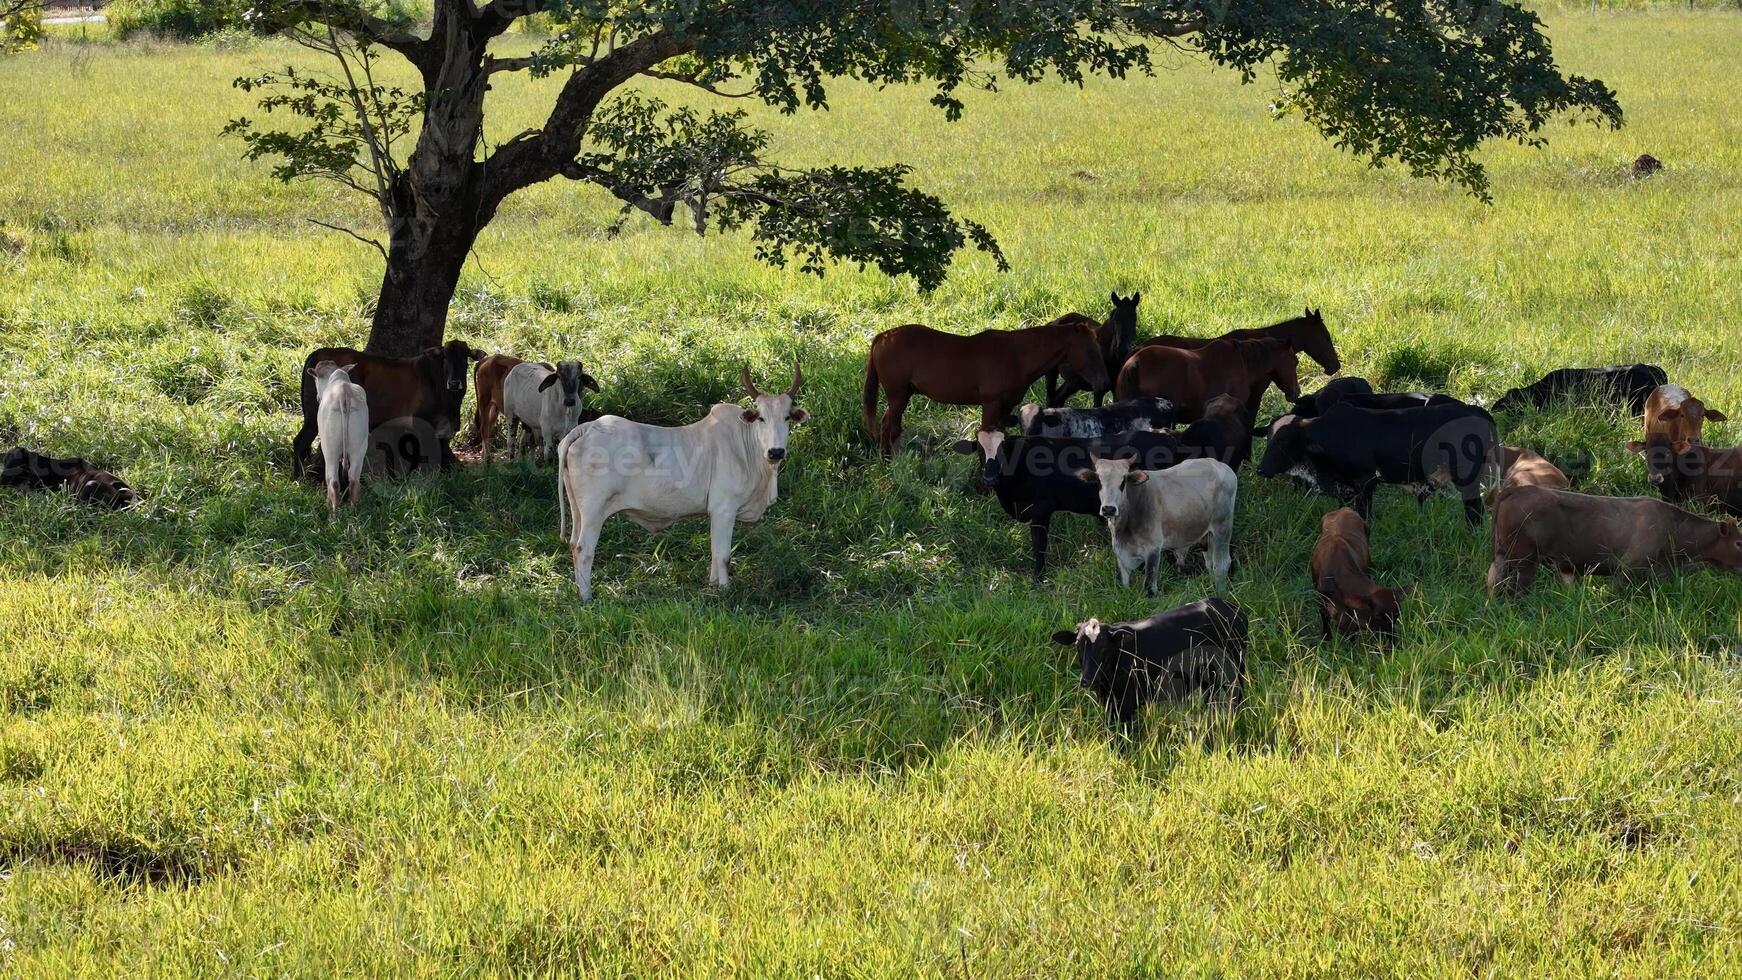 cows and horses in a field taking refuge from the afternoon sun in the shade of a tree photo